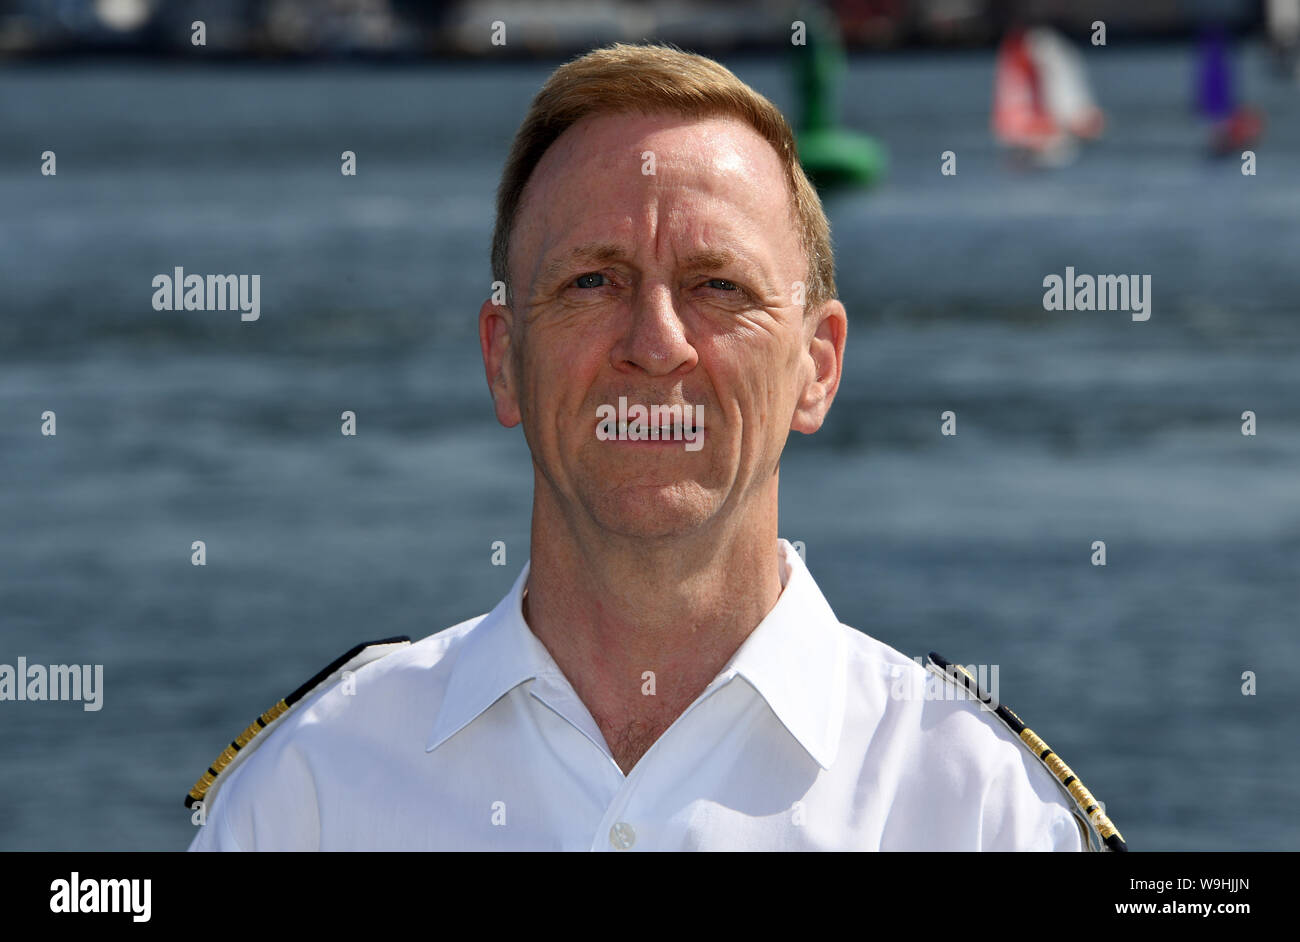 Kiel, Germany. 10th July, 2019. Andreas Koch, head of the Maritime Medicine  Section of the Institute for Experimental Medicine of the  Christian-Albrechts-University of Kiel and head of department at the  Institute of